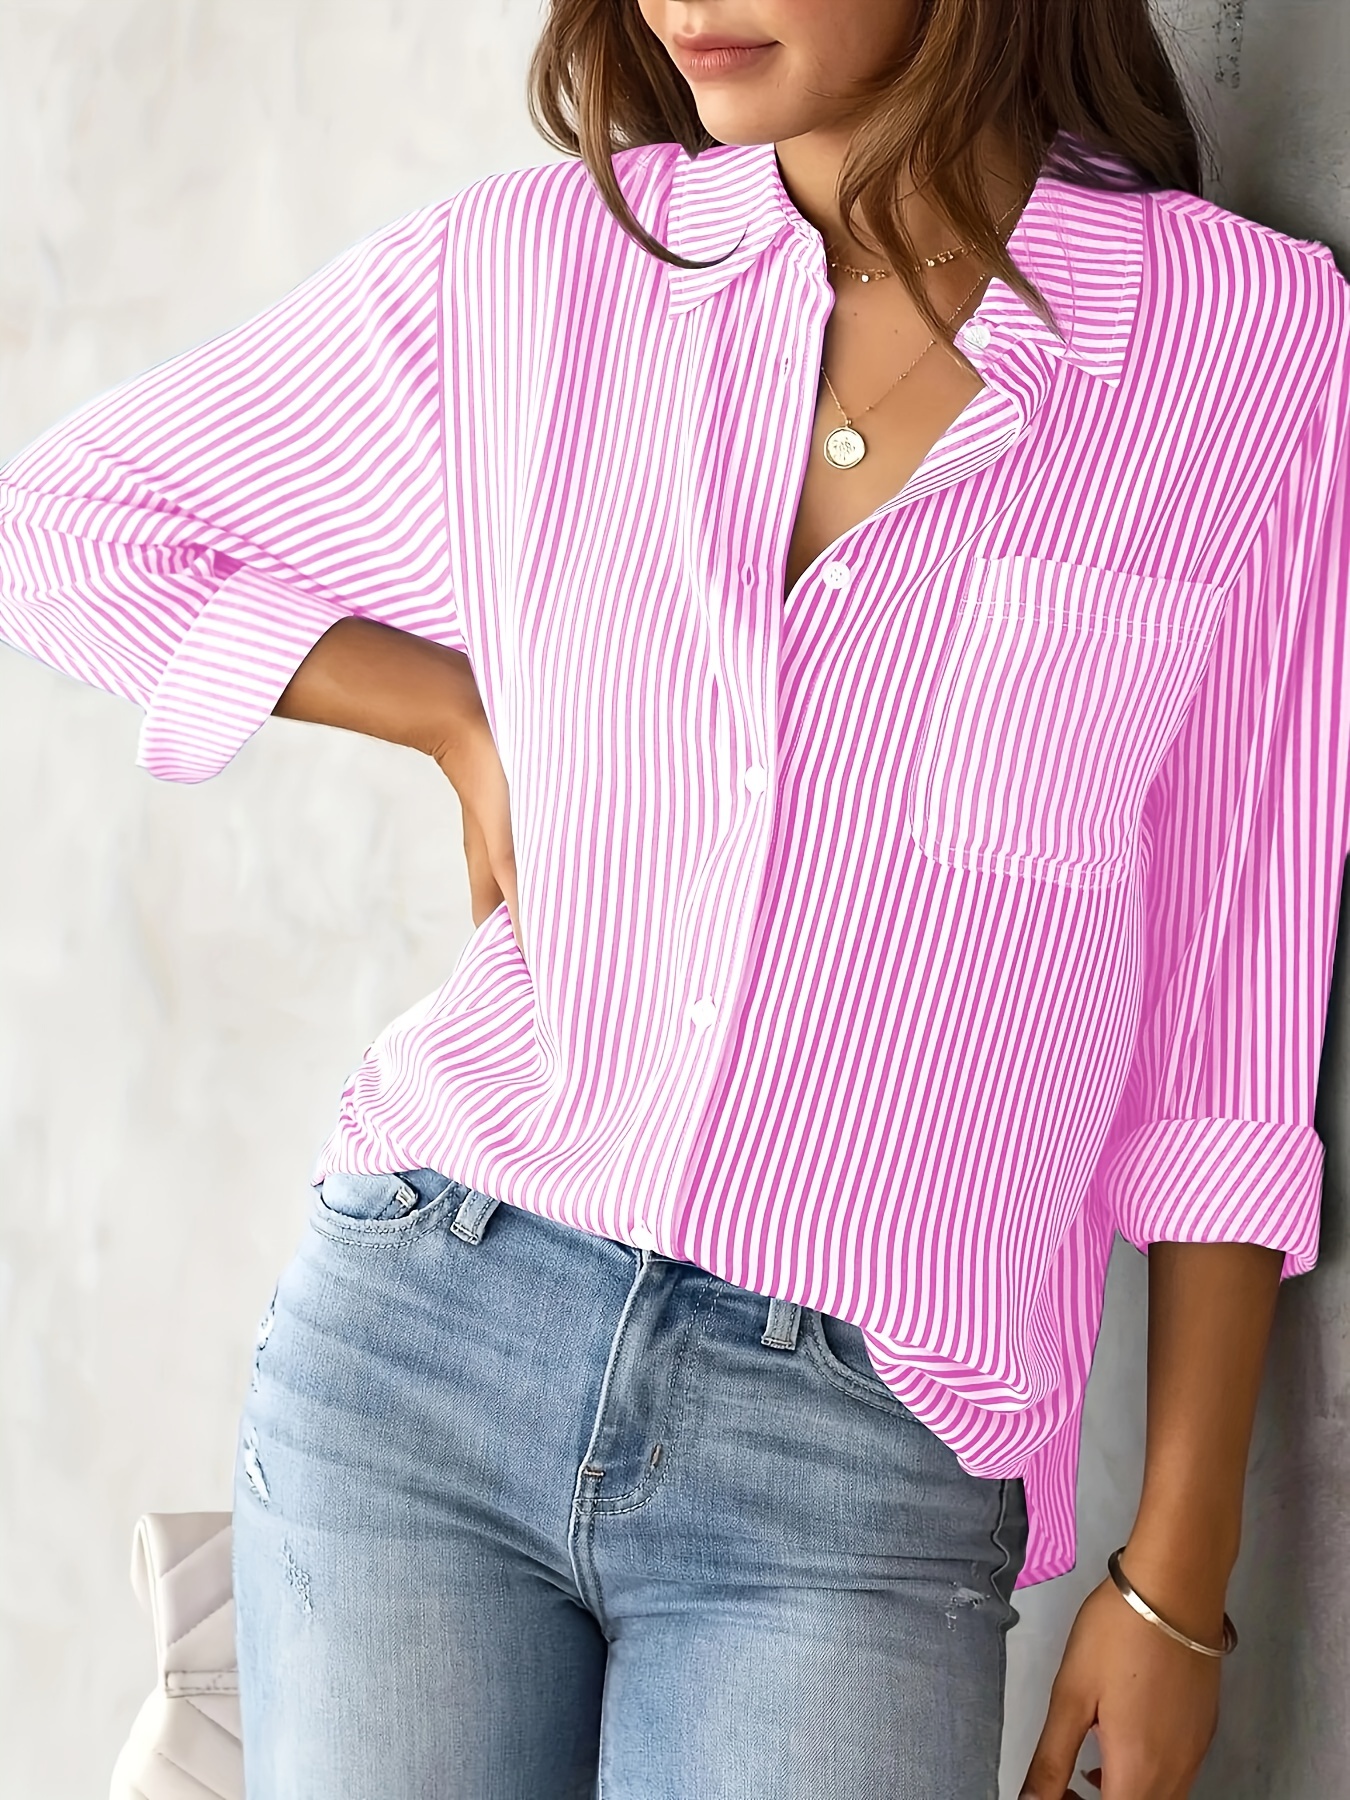 striped print button front shirt casual long sleeve shirt with pocket womens clothing details 1